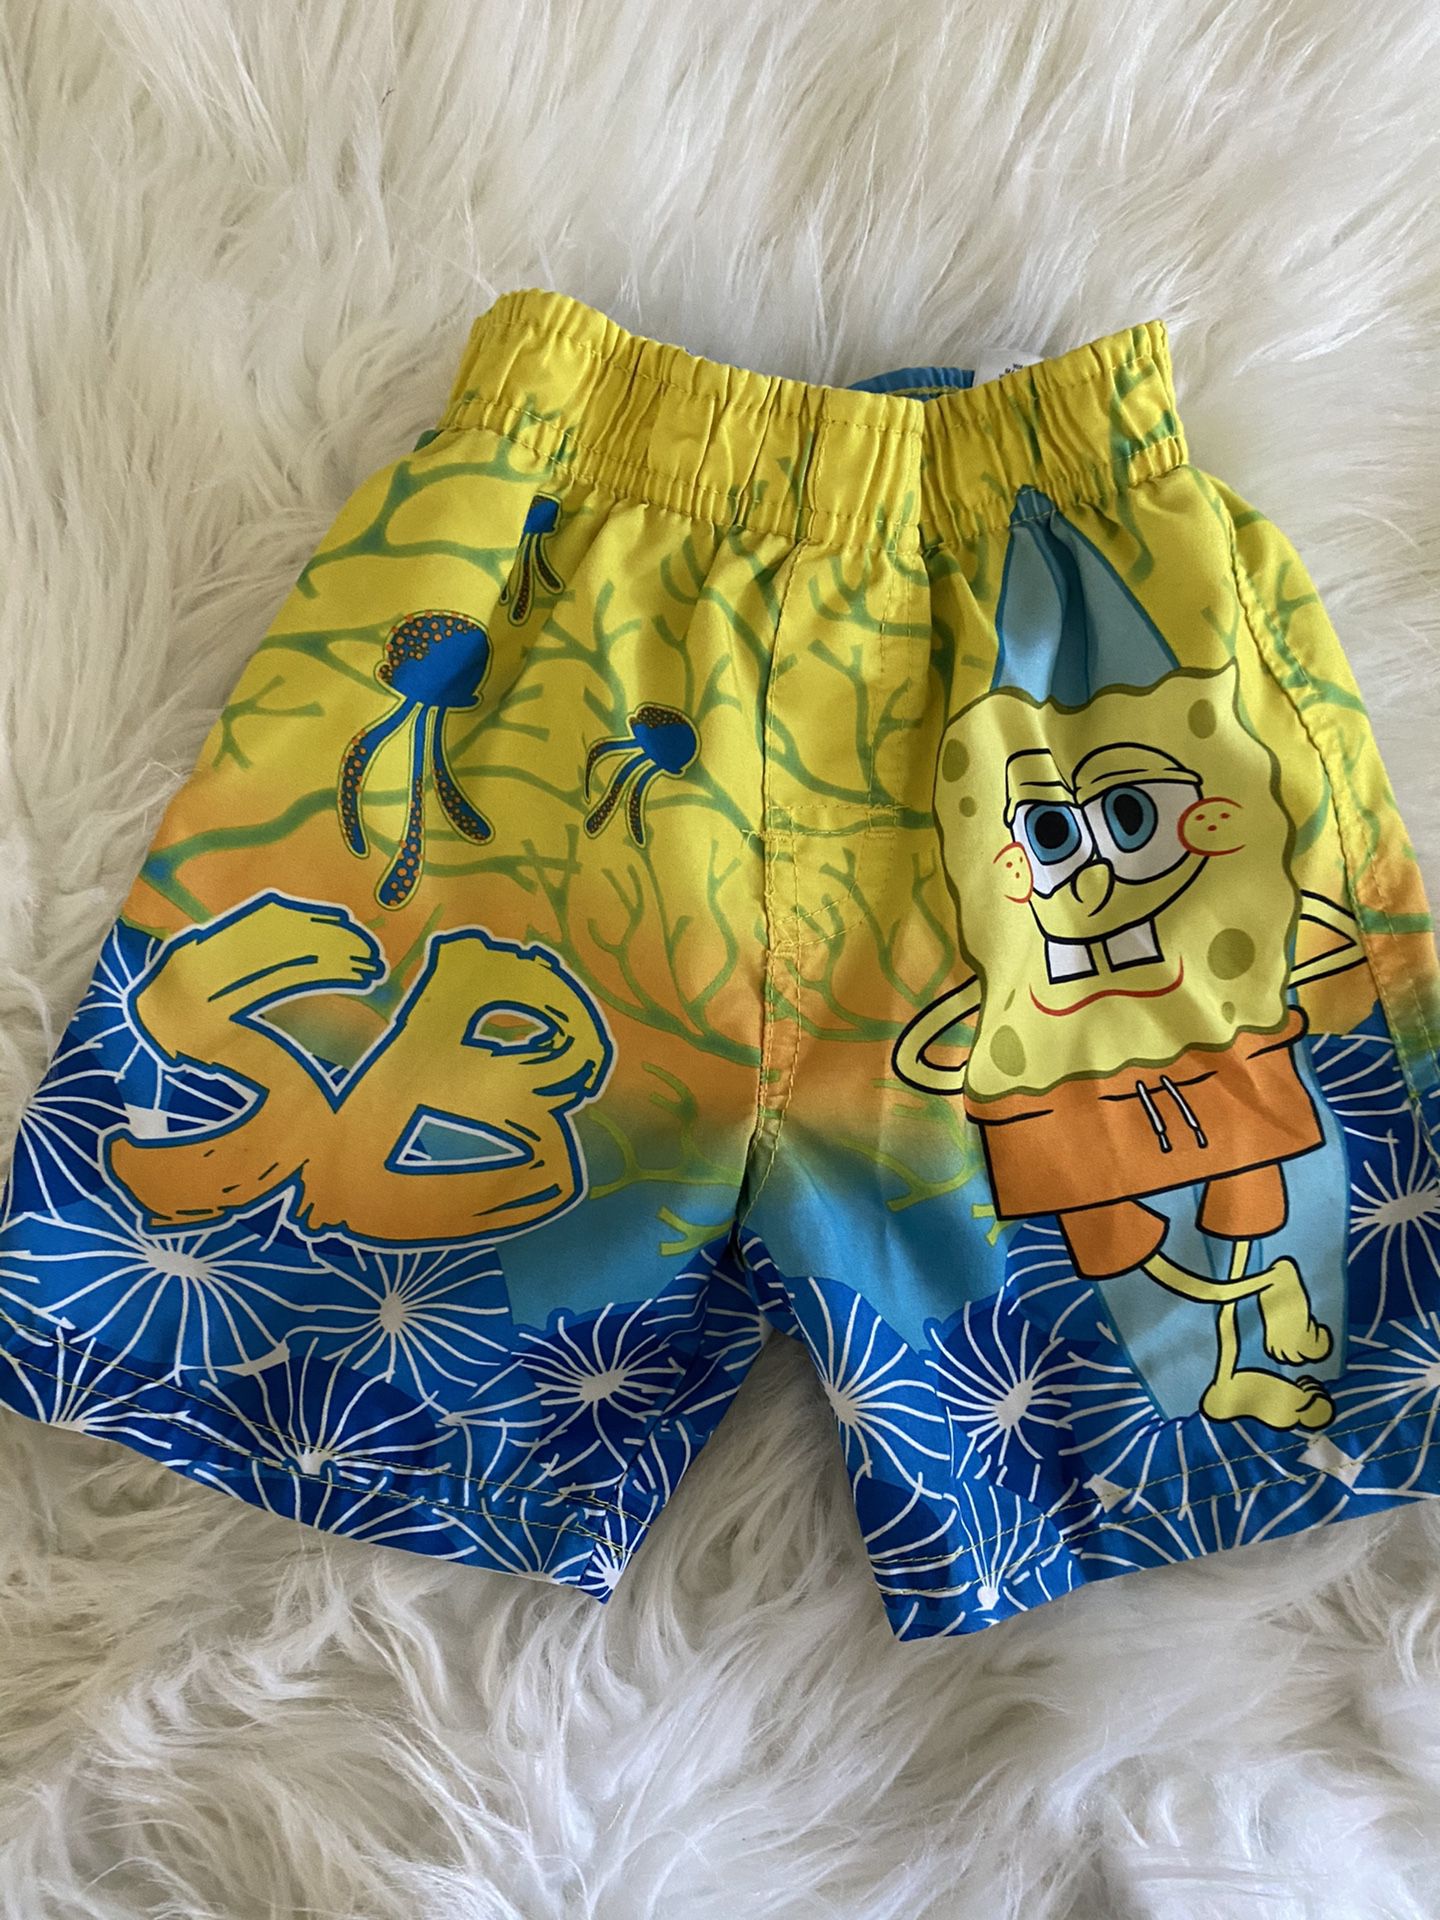 18 Months swim-trunks, excellent condition, (not sure if even wore) s/f p/f home, poos, no holds, pick up in Arnold